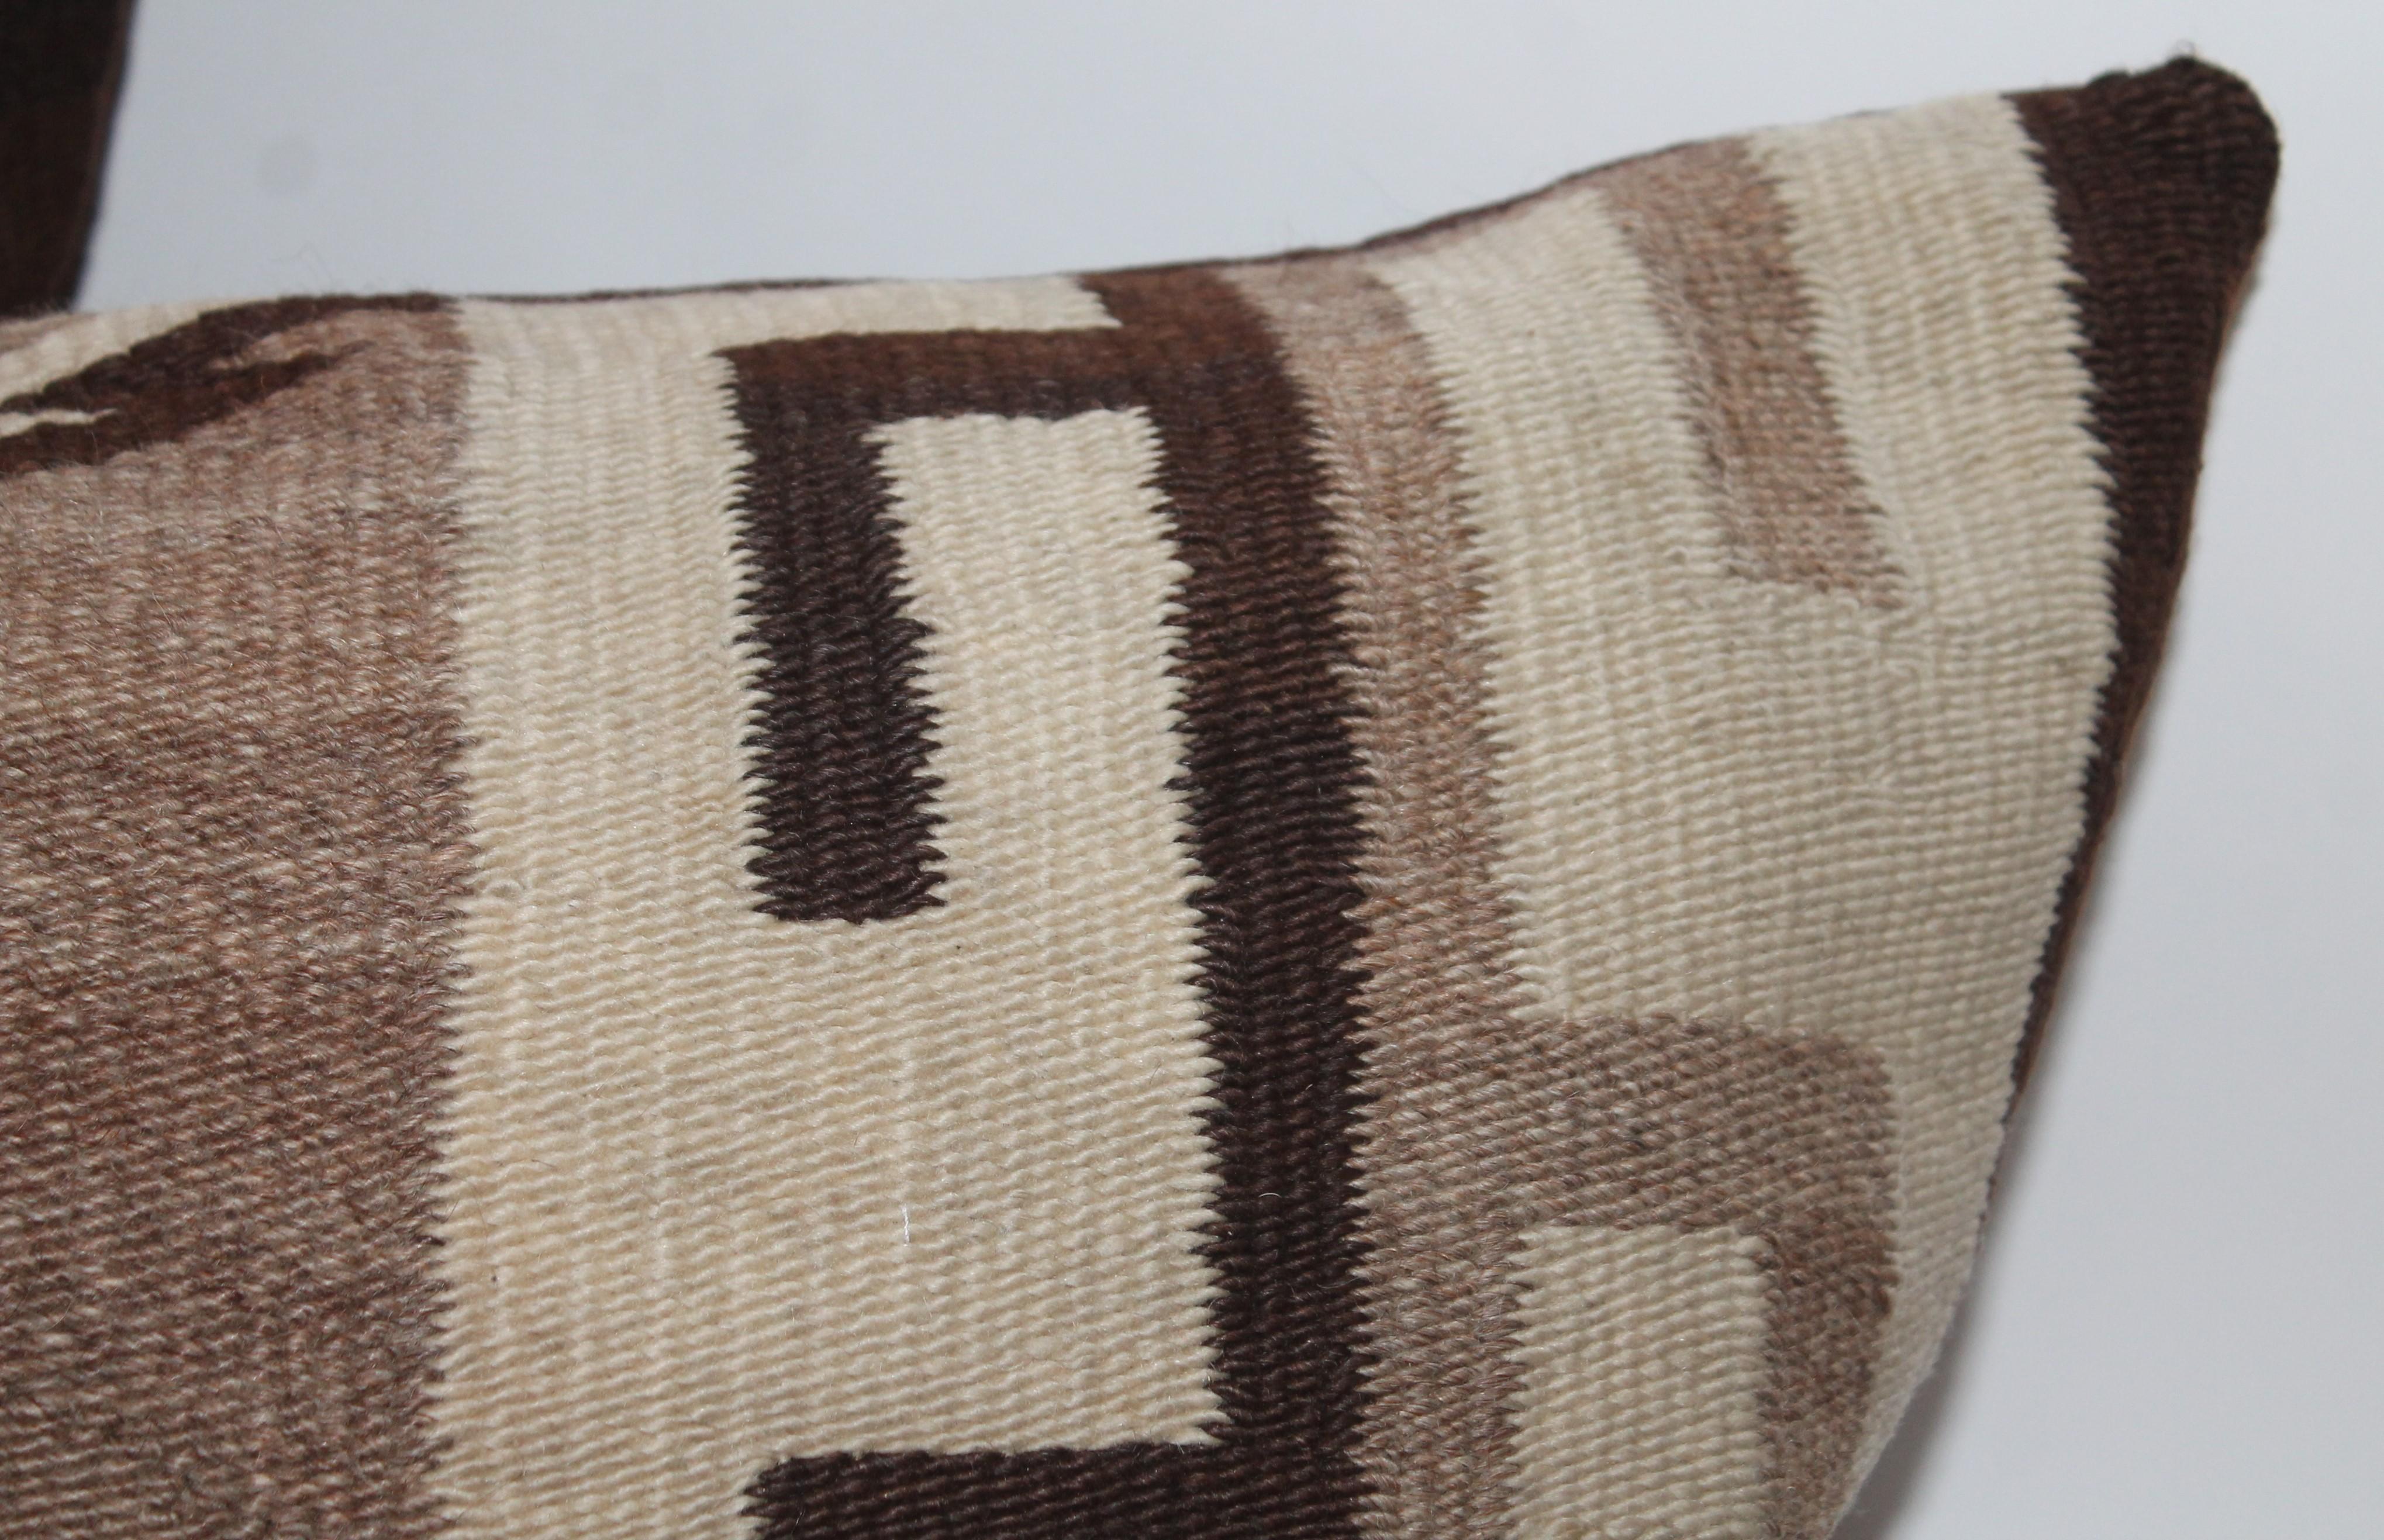 Navajo Indian weaving bolster pillow with brown cotton backing. This diamond pattern weaving pillow is in fine condition and is oversized.